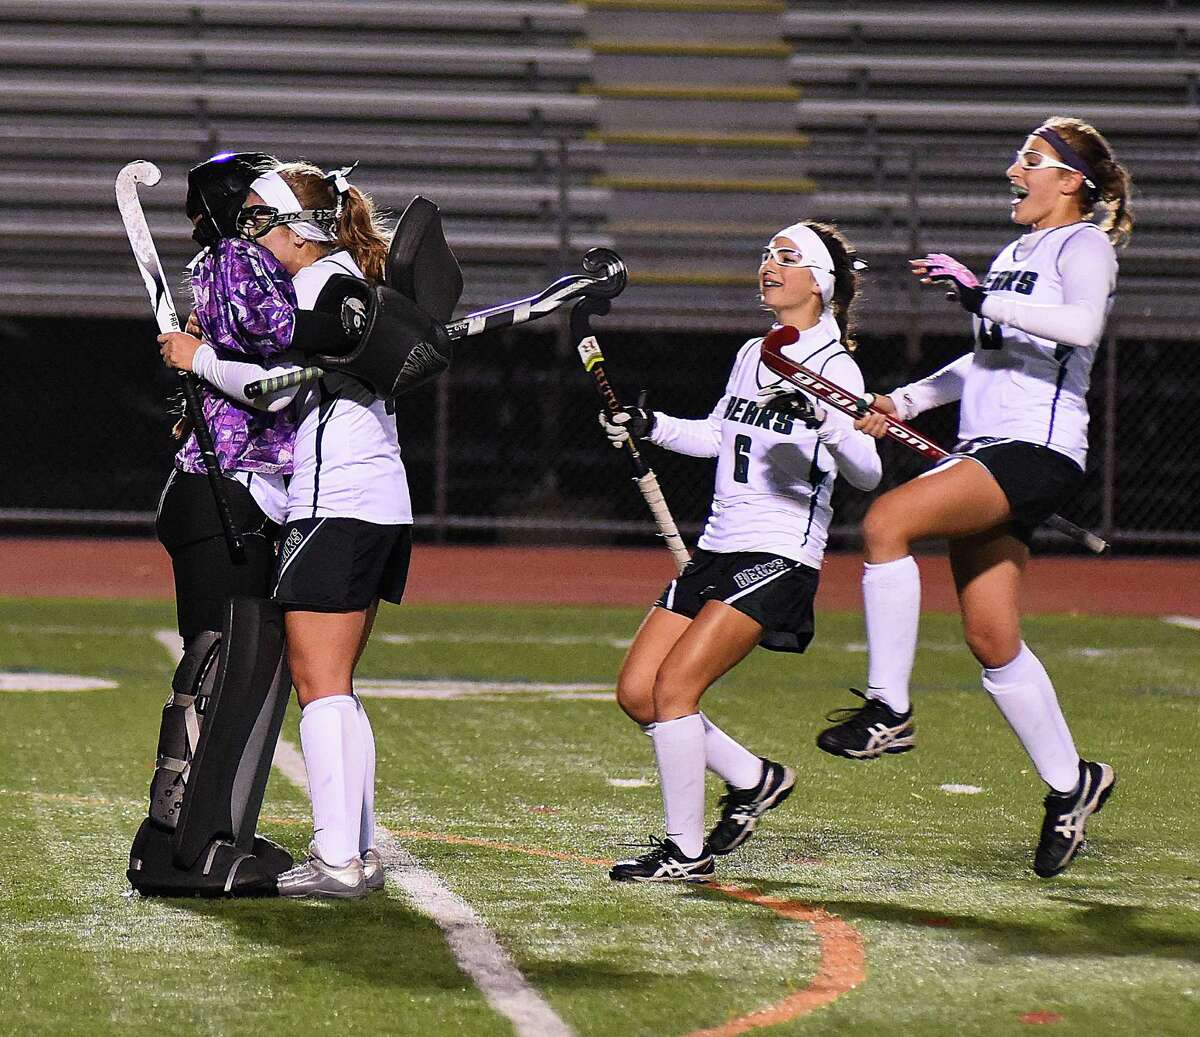 Norwalk field hockey goalie Sam Troetti, left, is embraced by teammates, from second from left, Isabell Nees, Victoria Chiappetta and Frances Mirabile at the end of the Bears' 2-1 win over New Canaan in Friday's FCIAC field hockey quarterfinal at Testa Field in Norwalk.